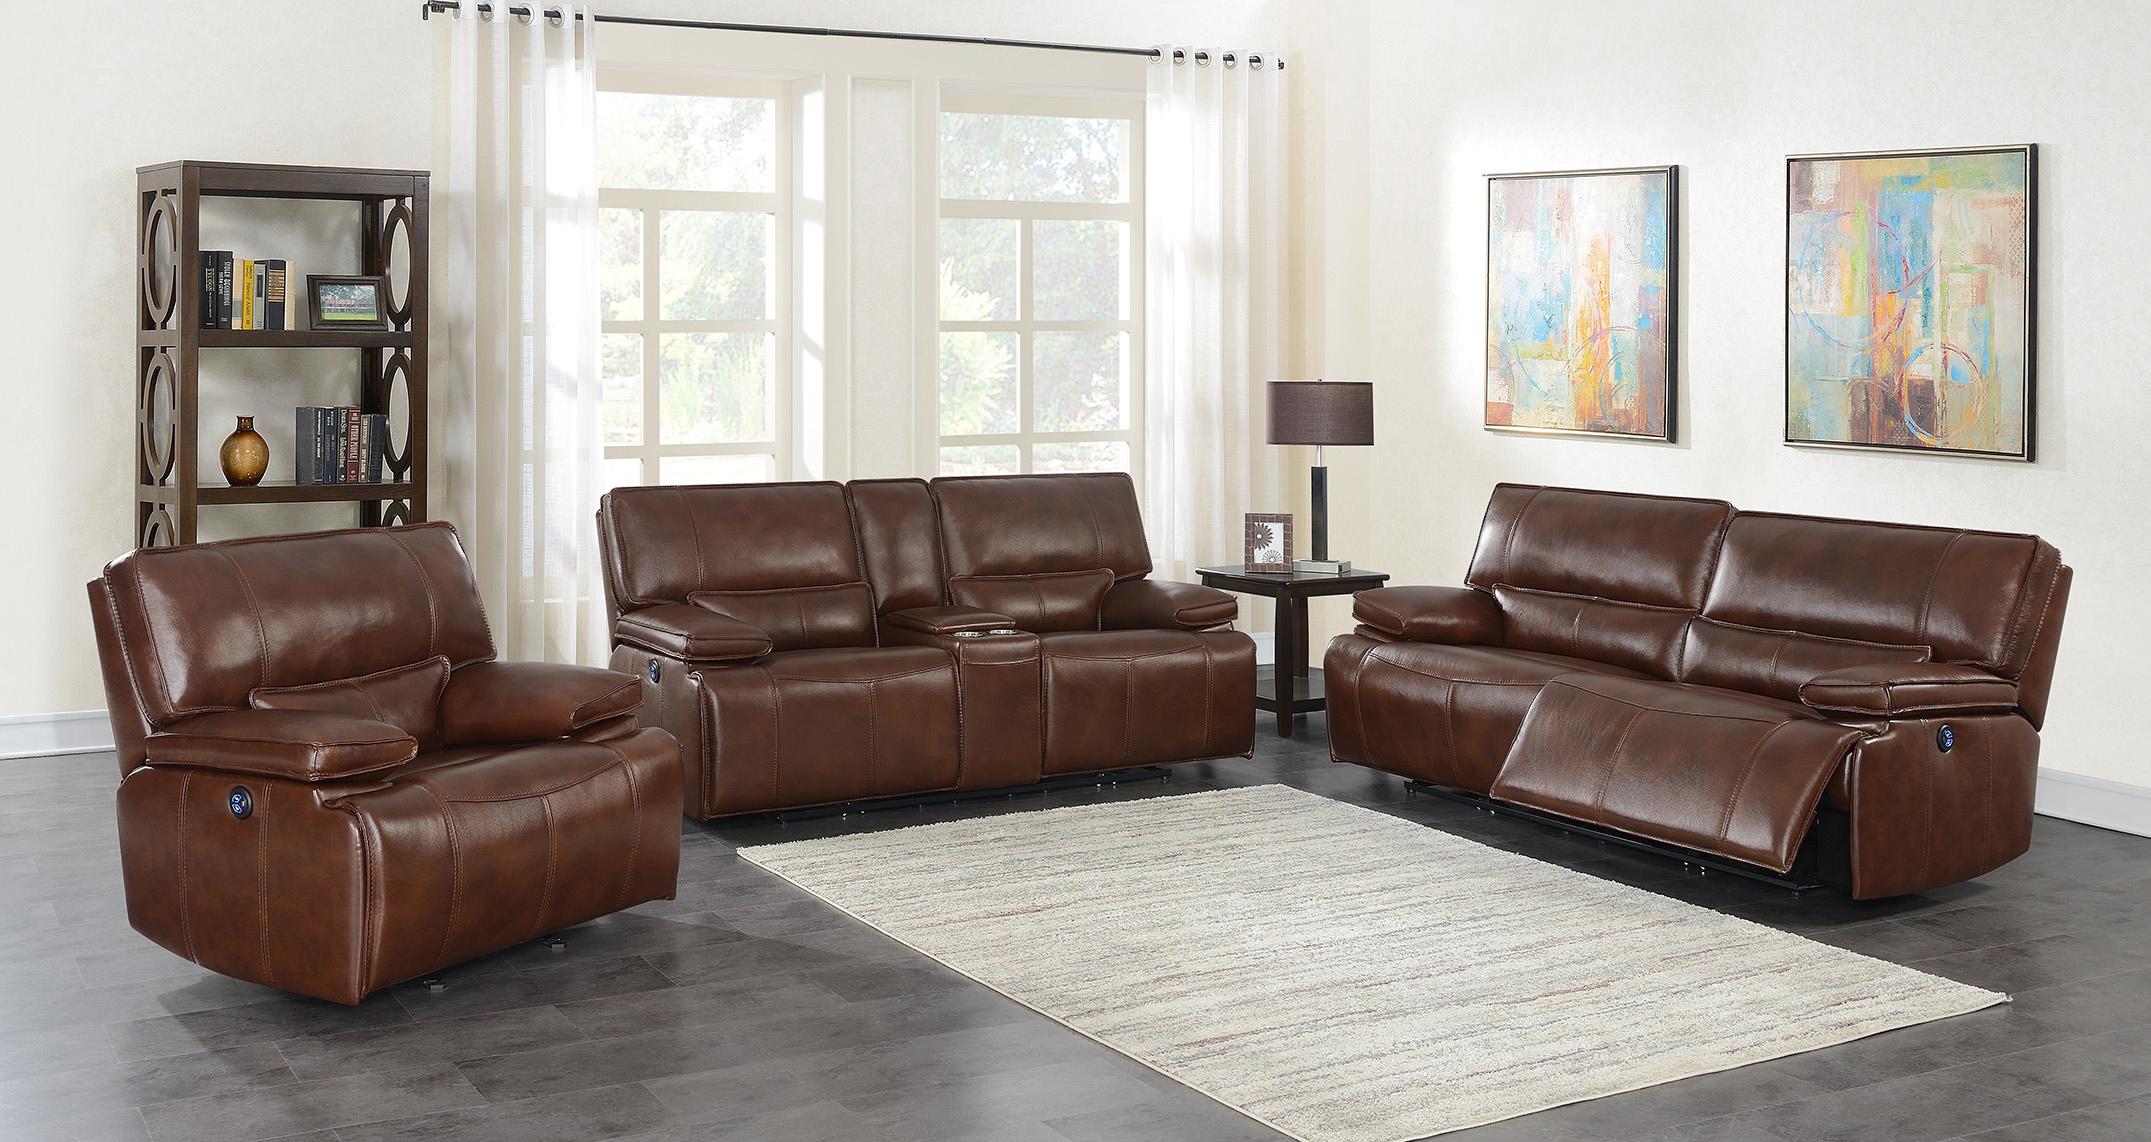 Modern Power Living Room Set 610411P-S3 Southwick 610411P-S3 in Brown 